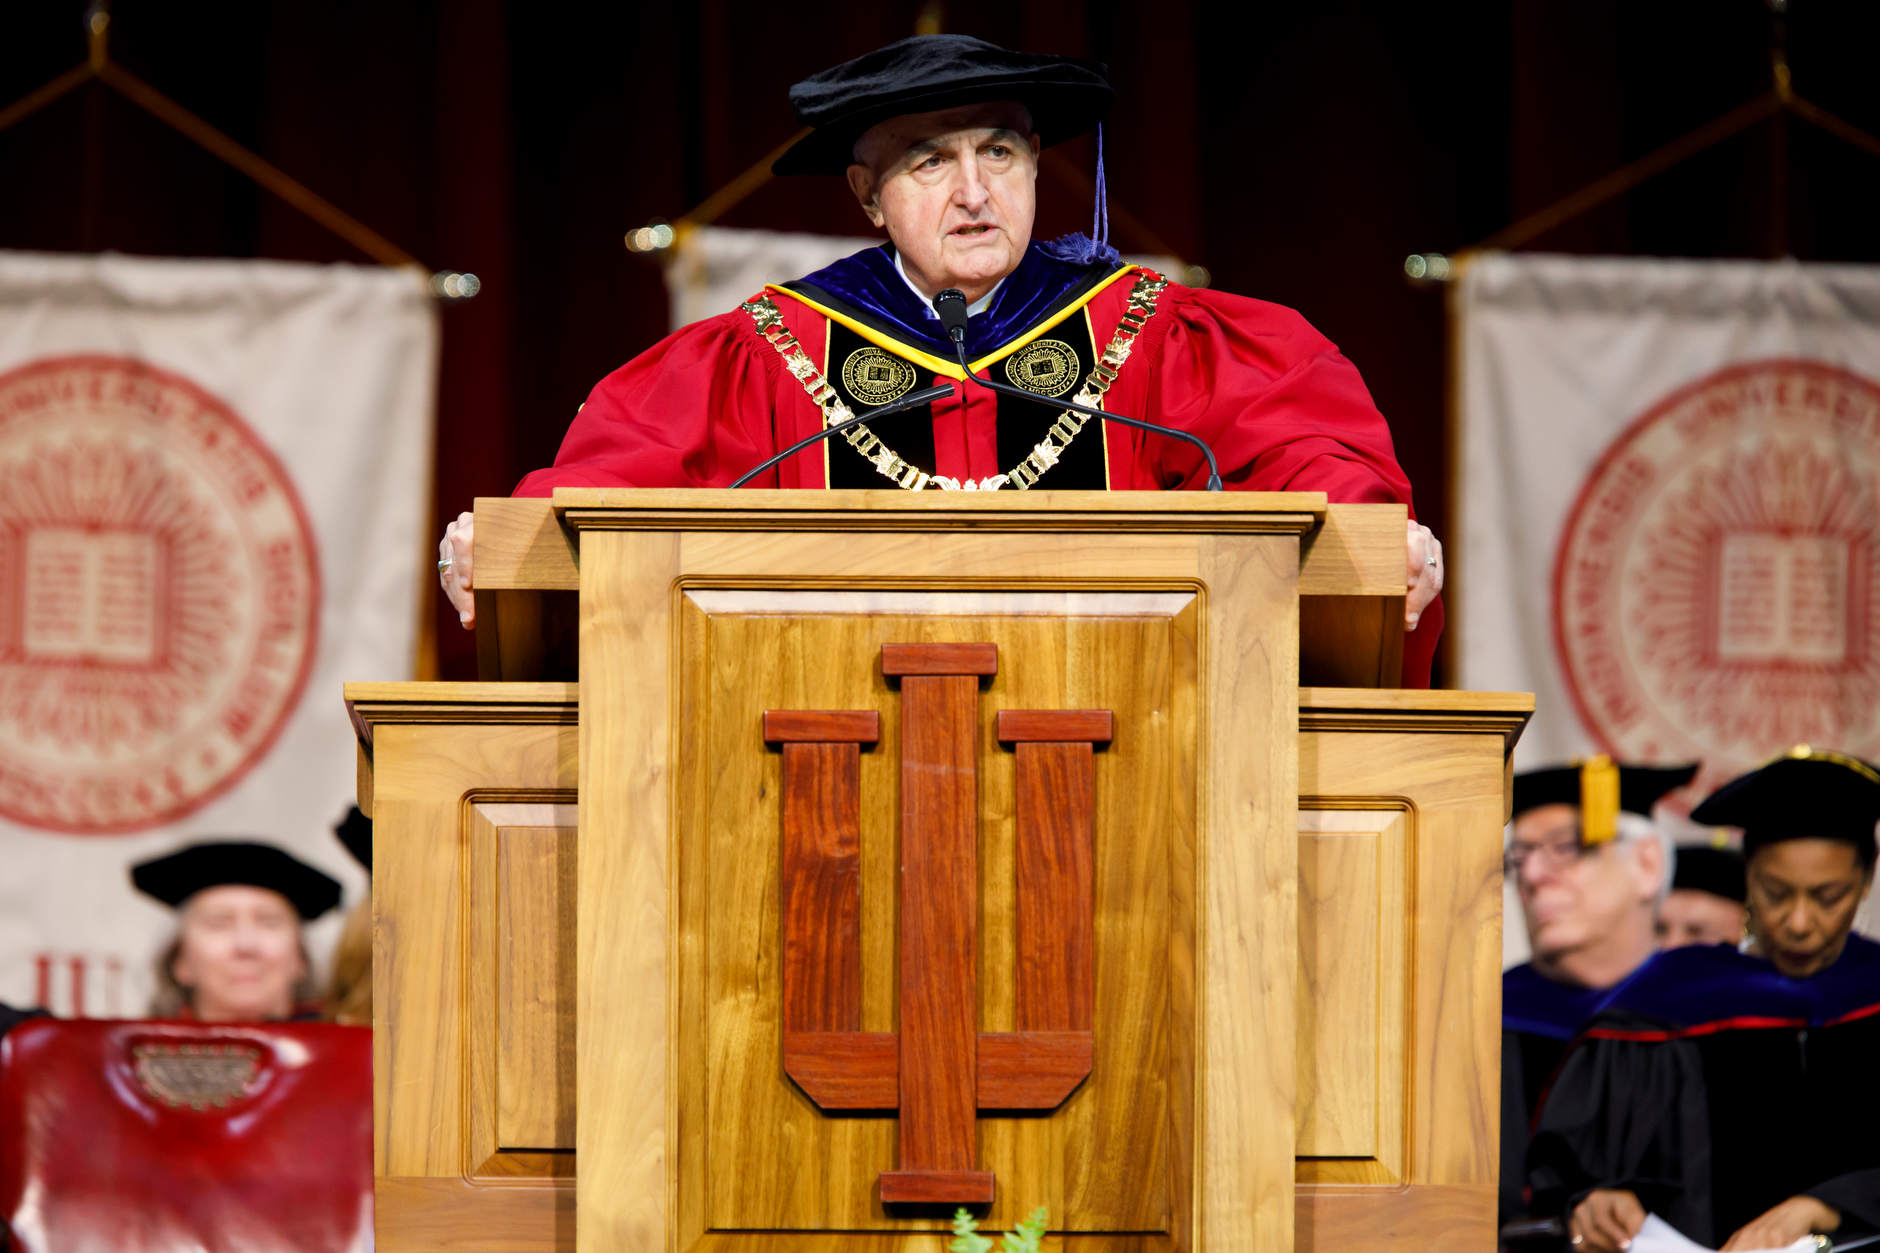 Indiana University President Michael A. McRobbie speaks during the IU South Bend Commencement at the University of Notre Dame on Tuesday, May 7, 2019. (James Brosher/Indiana University)